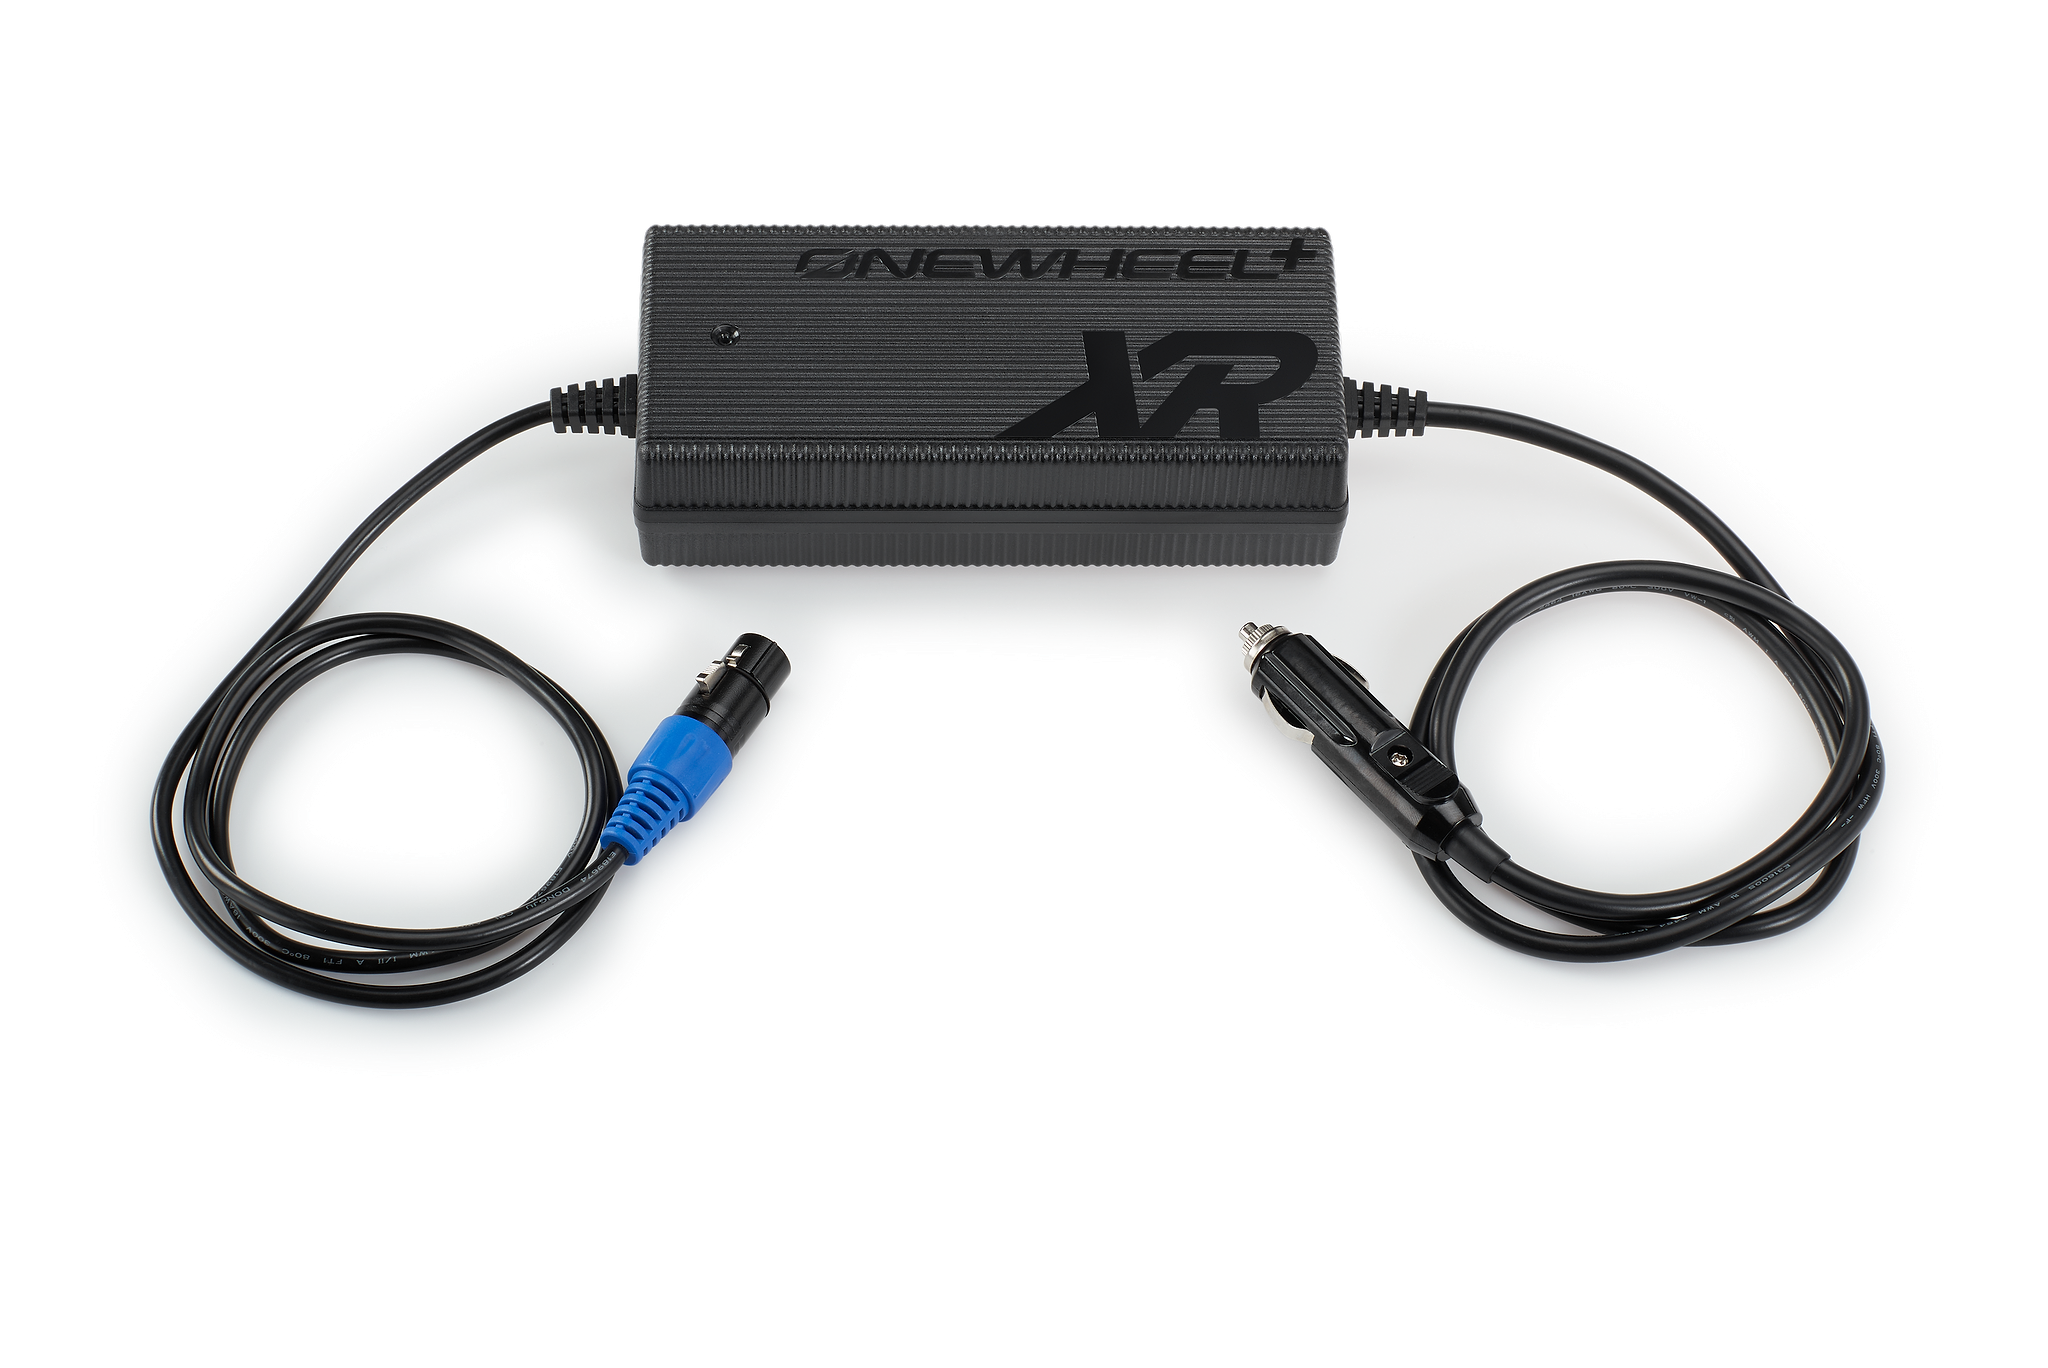 Car Charger Onewheel+ XR